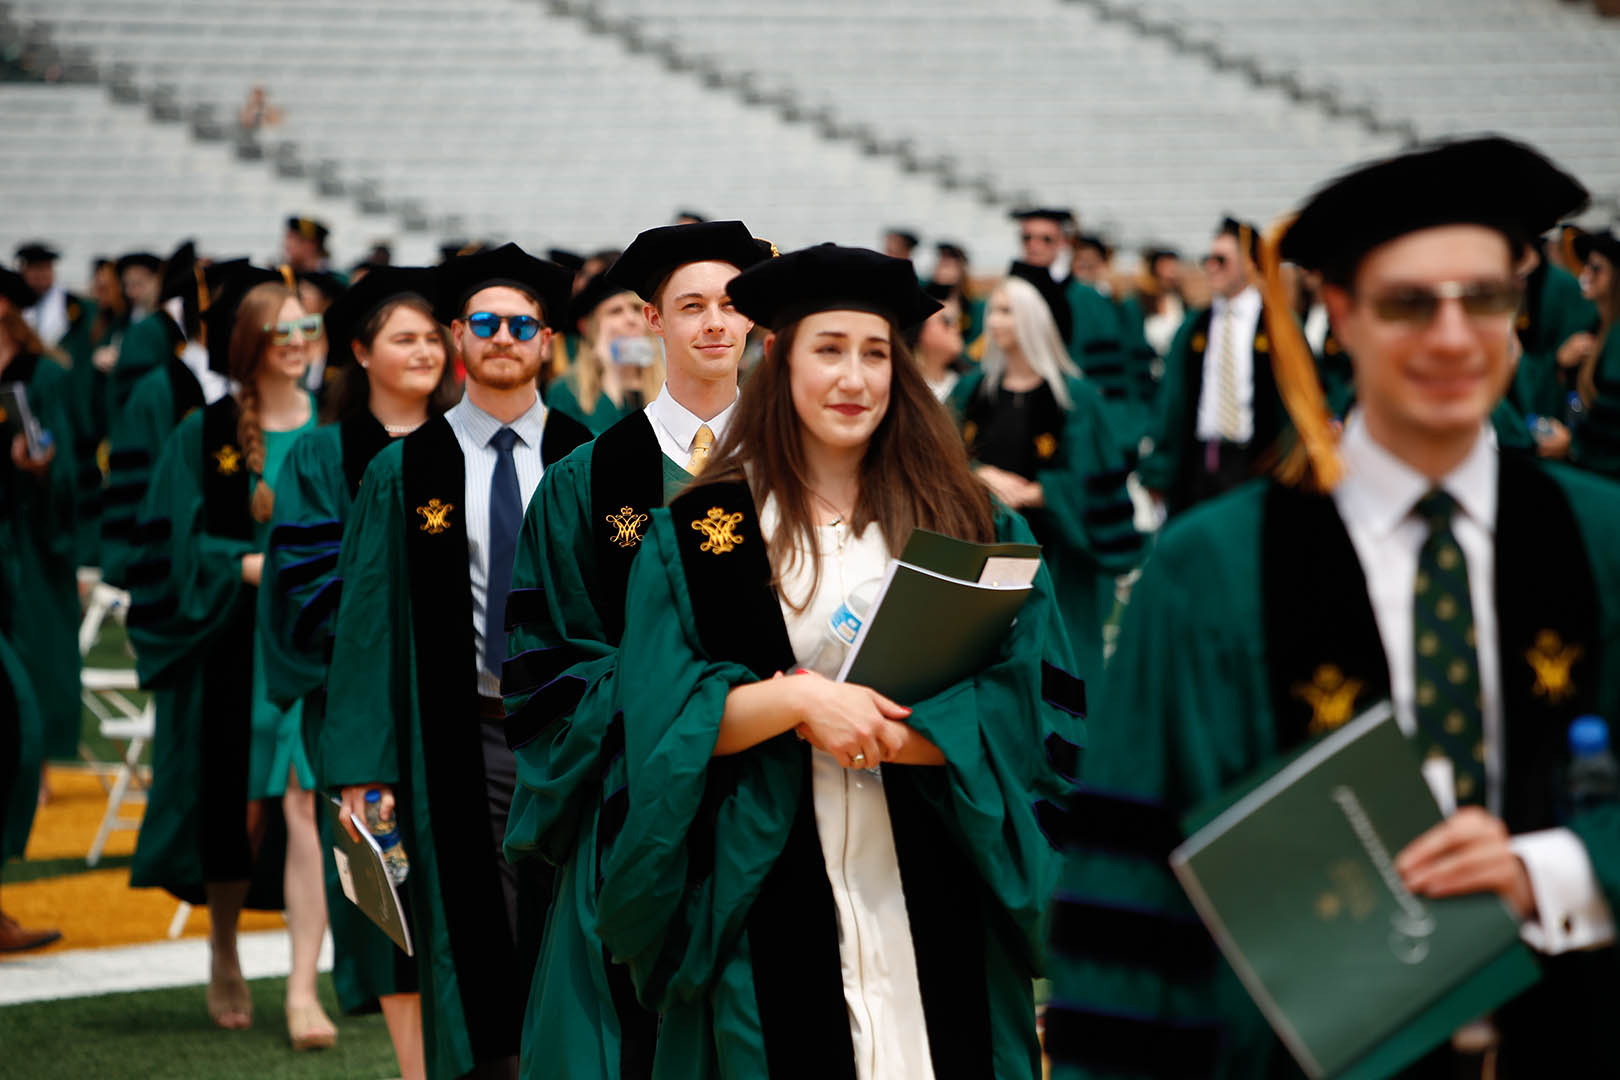 Commencement 2021: A Visual Celebration | William & Mary Law School